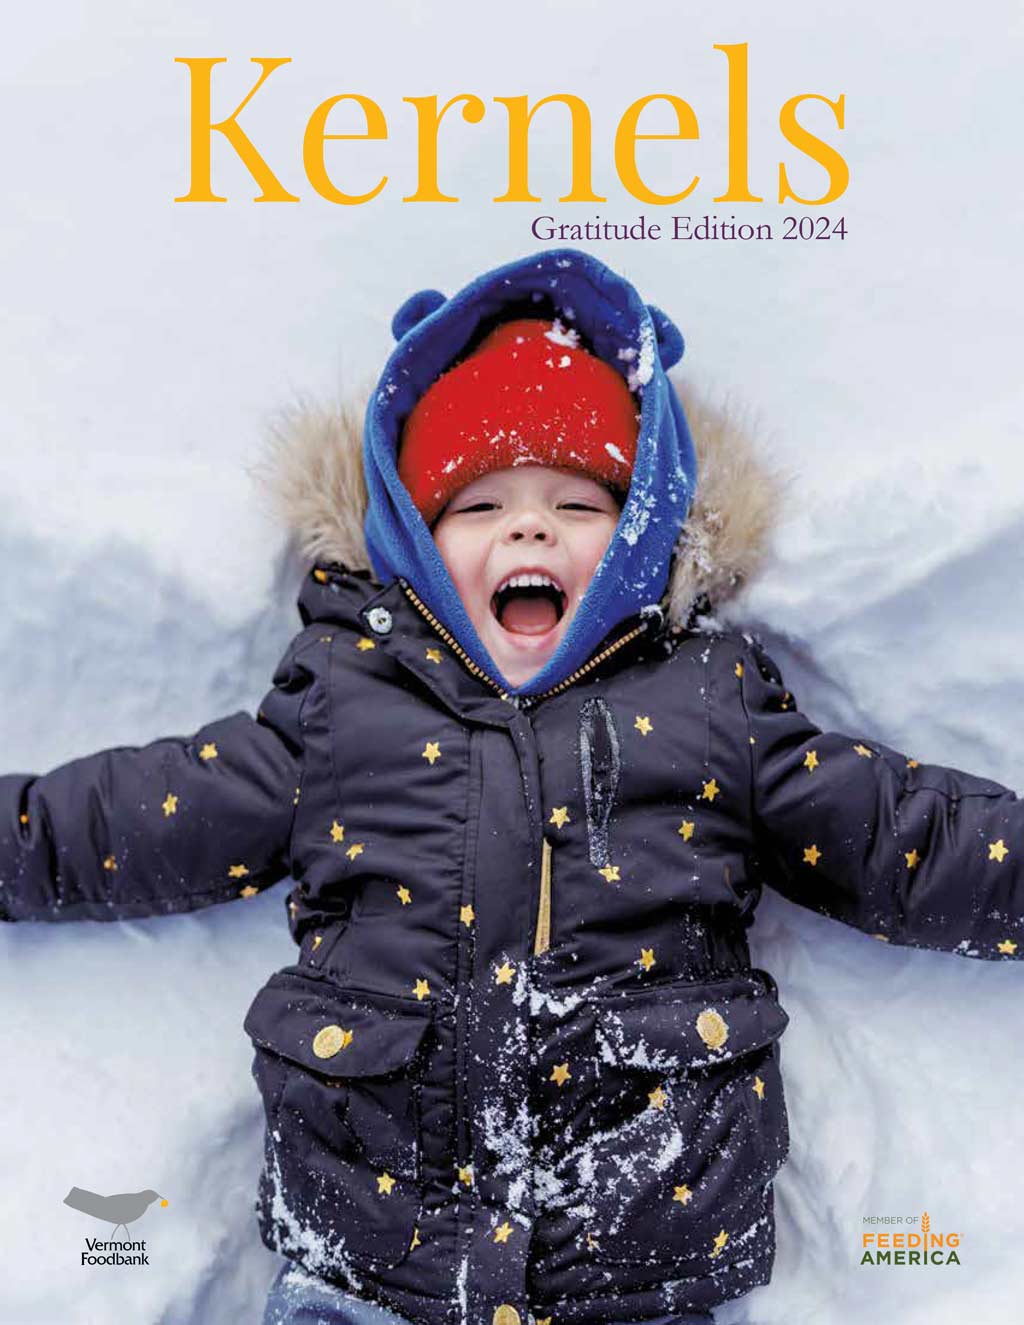 Cover photo of the 2024 Gratitude Edition featuring a child making a snow angel.